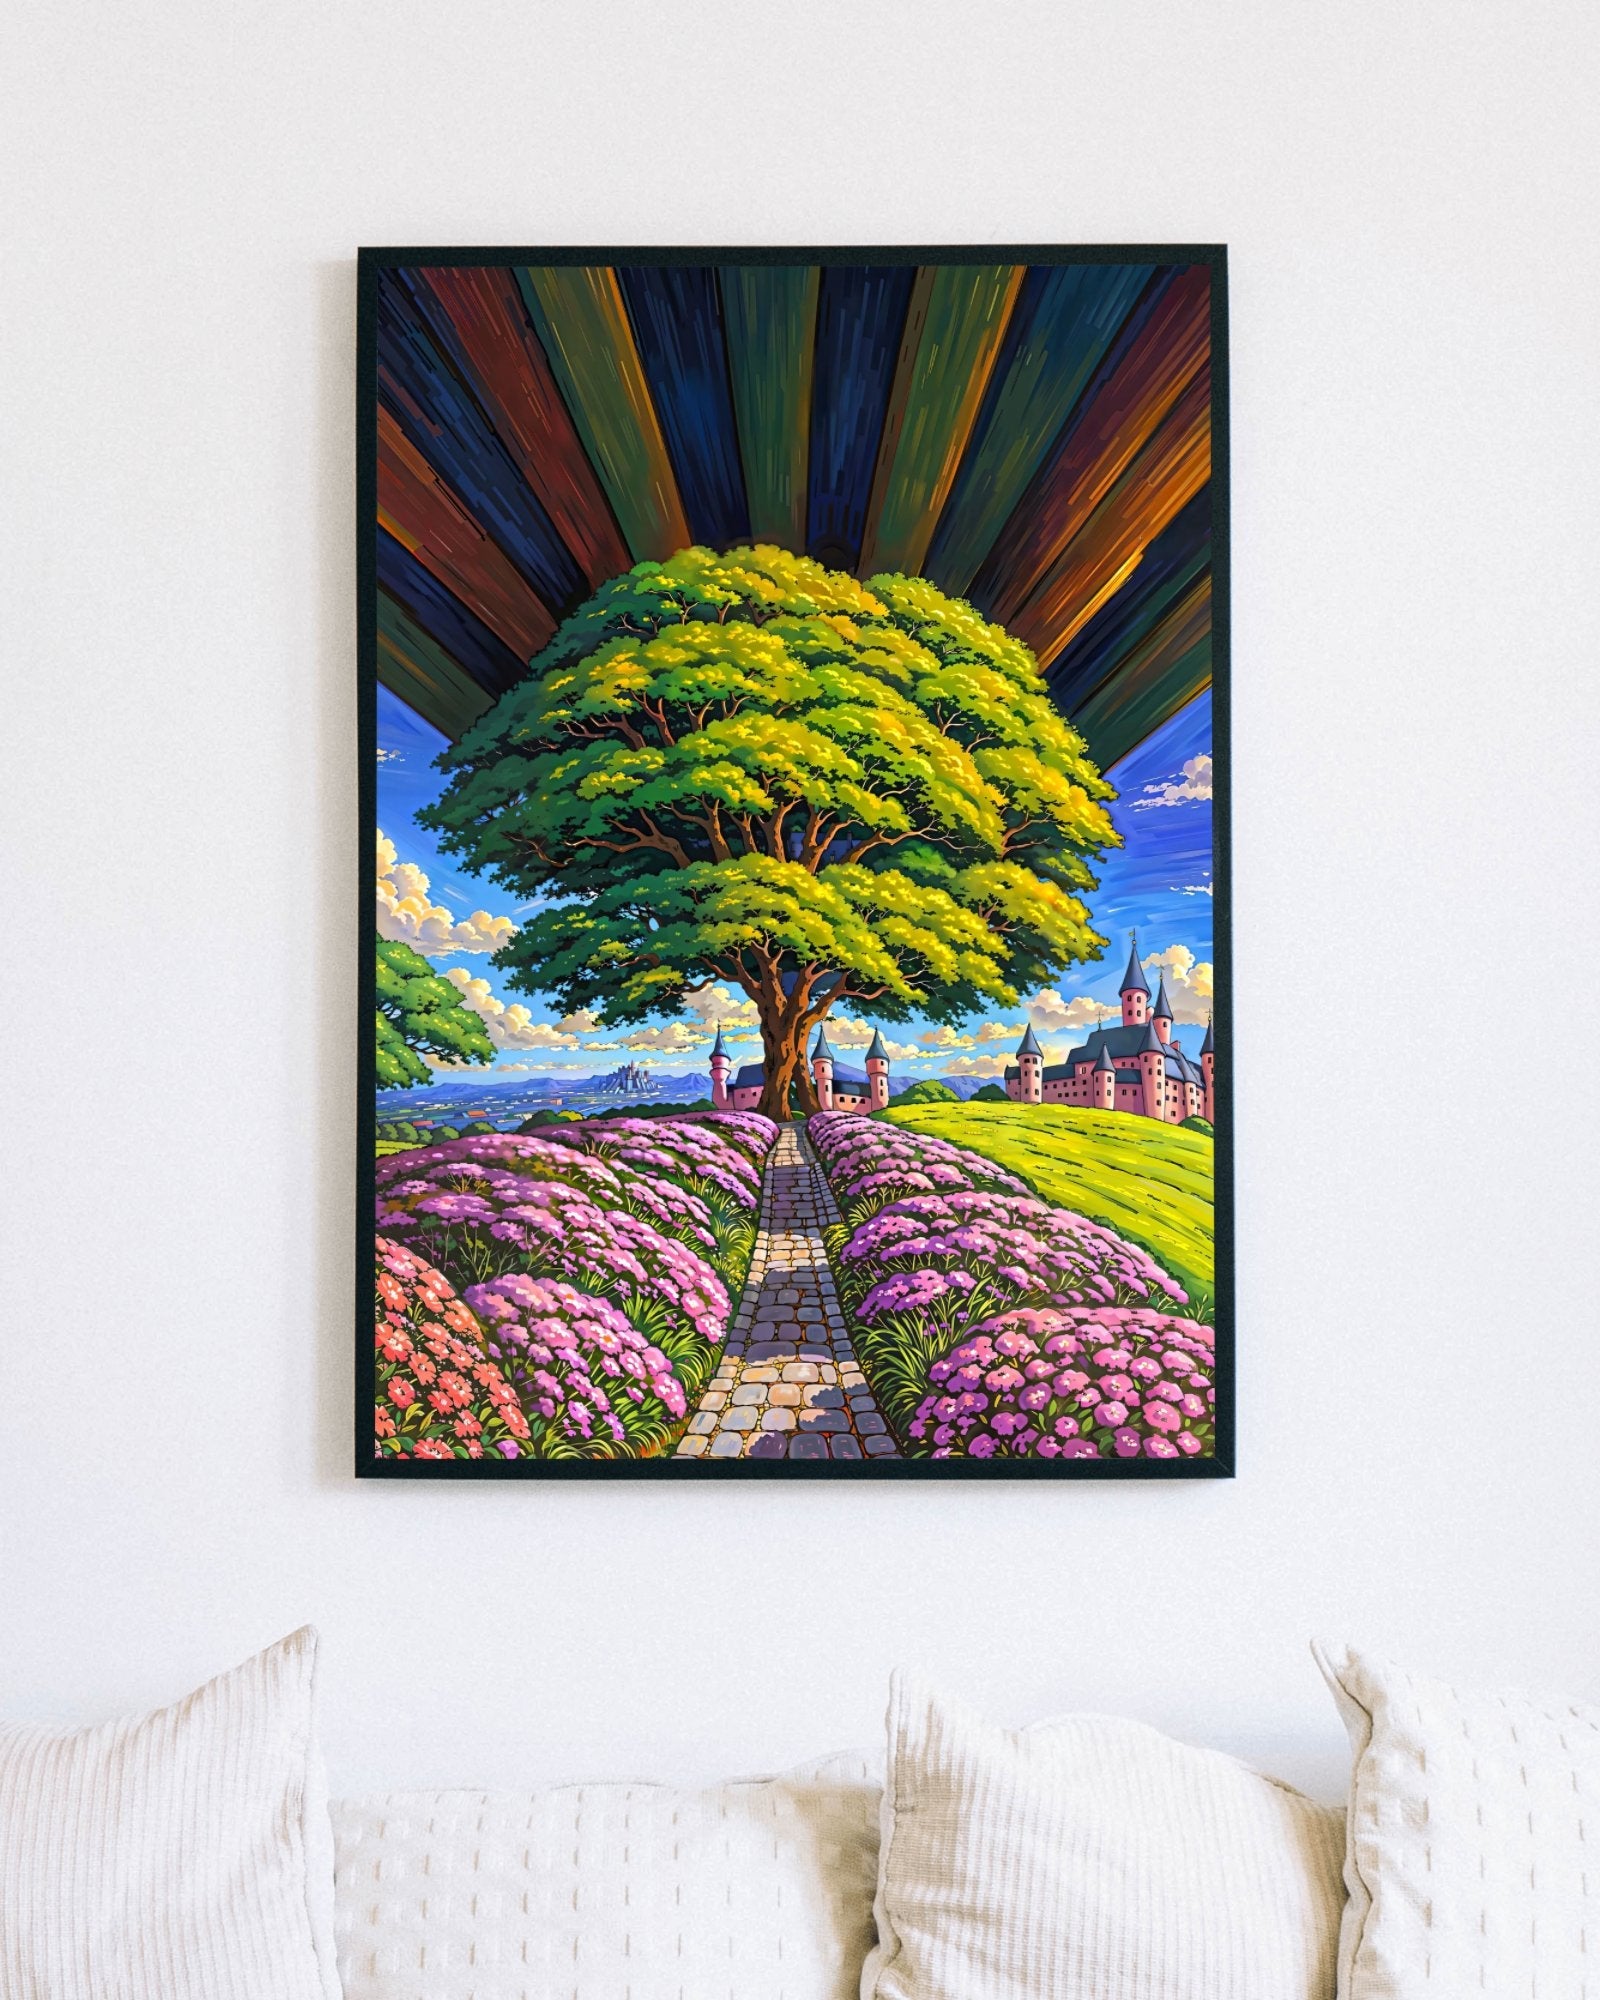 World tree and beyond - Poster - Ever colorful